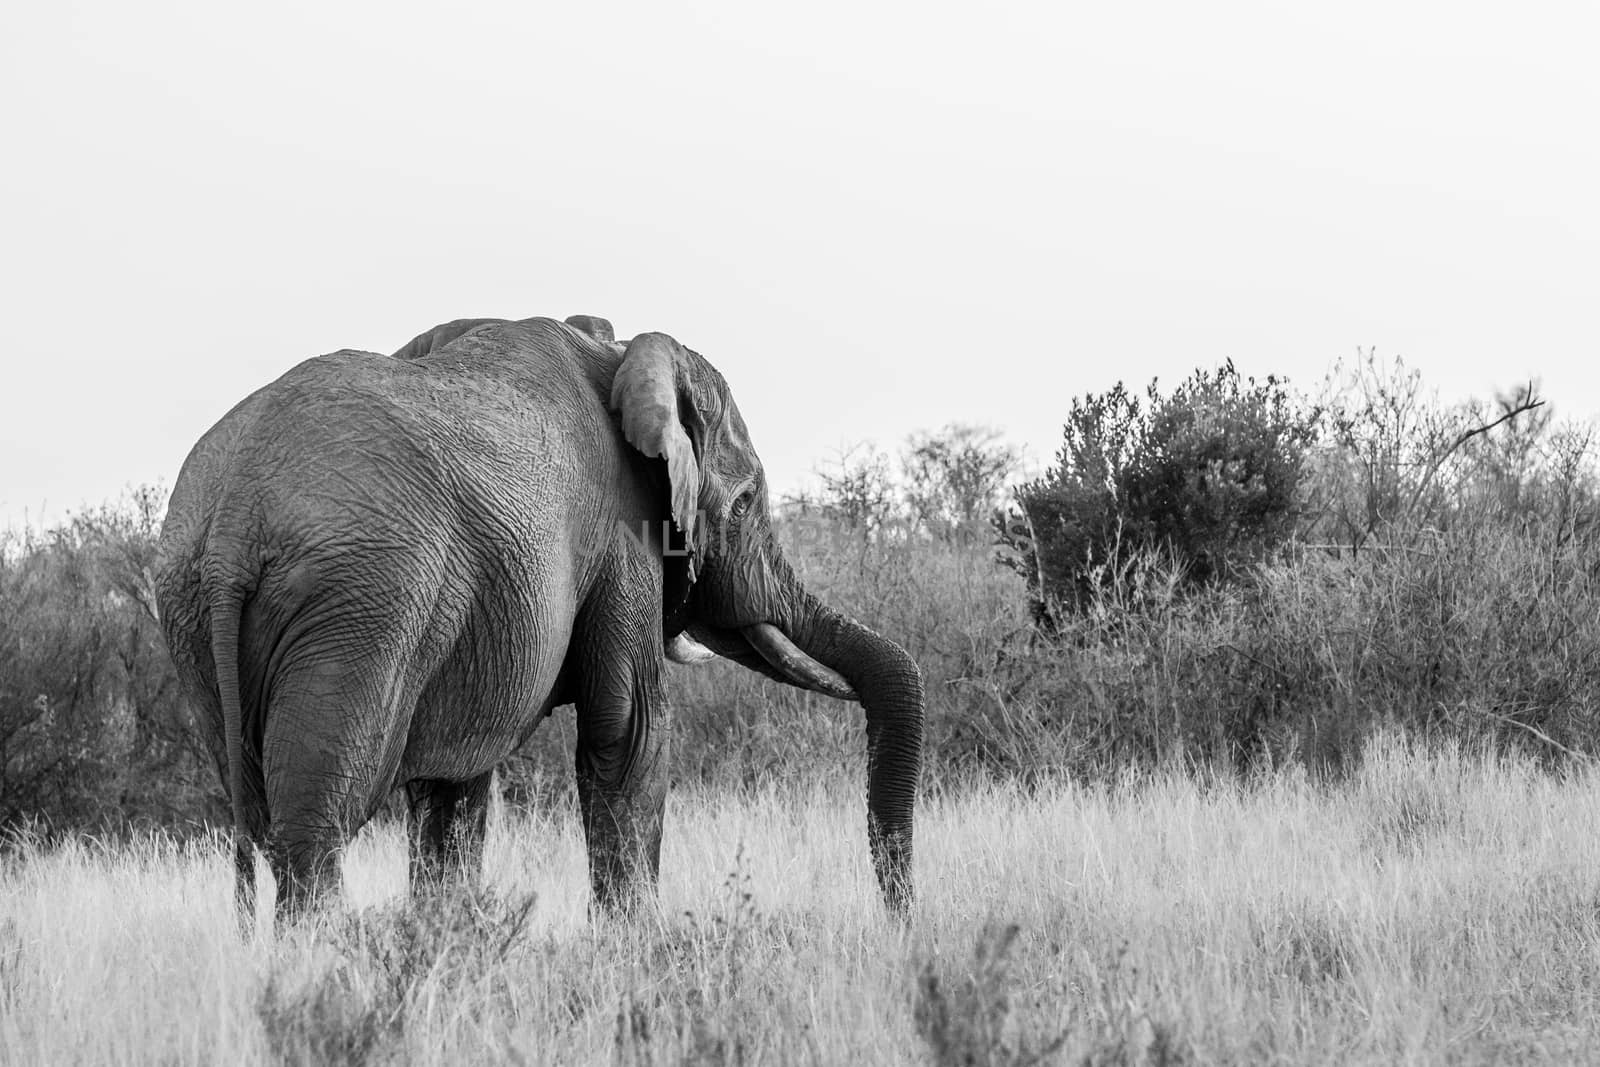 Big Elephant bull facing away from the camera in black and white in the Welgevonden game reserve, South Africa.